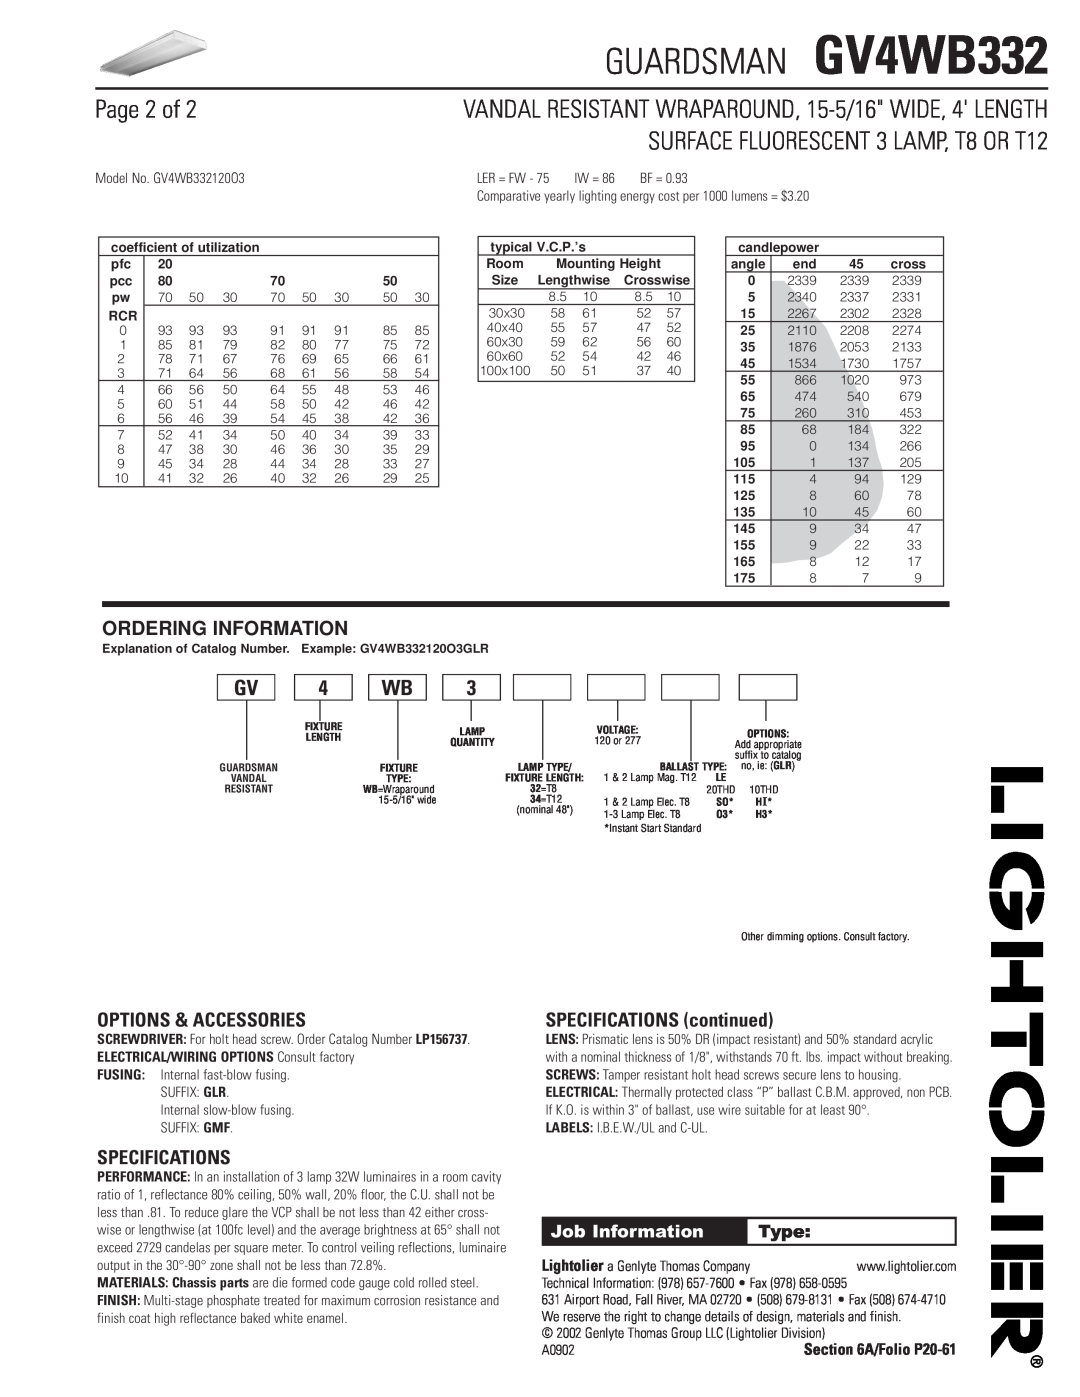 Lightolier GV4WB332 SURFACE FLUORESCENT 3 LAMP, T8 OR T12, Ordering Information, Options & Accessories, Specifications 